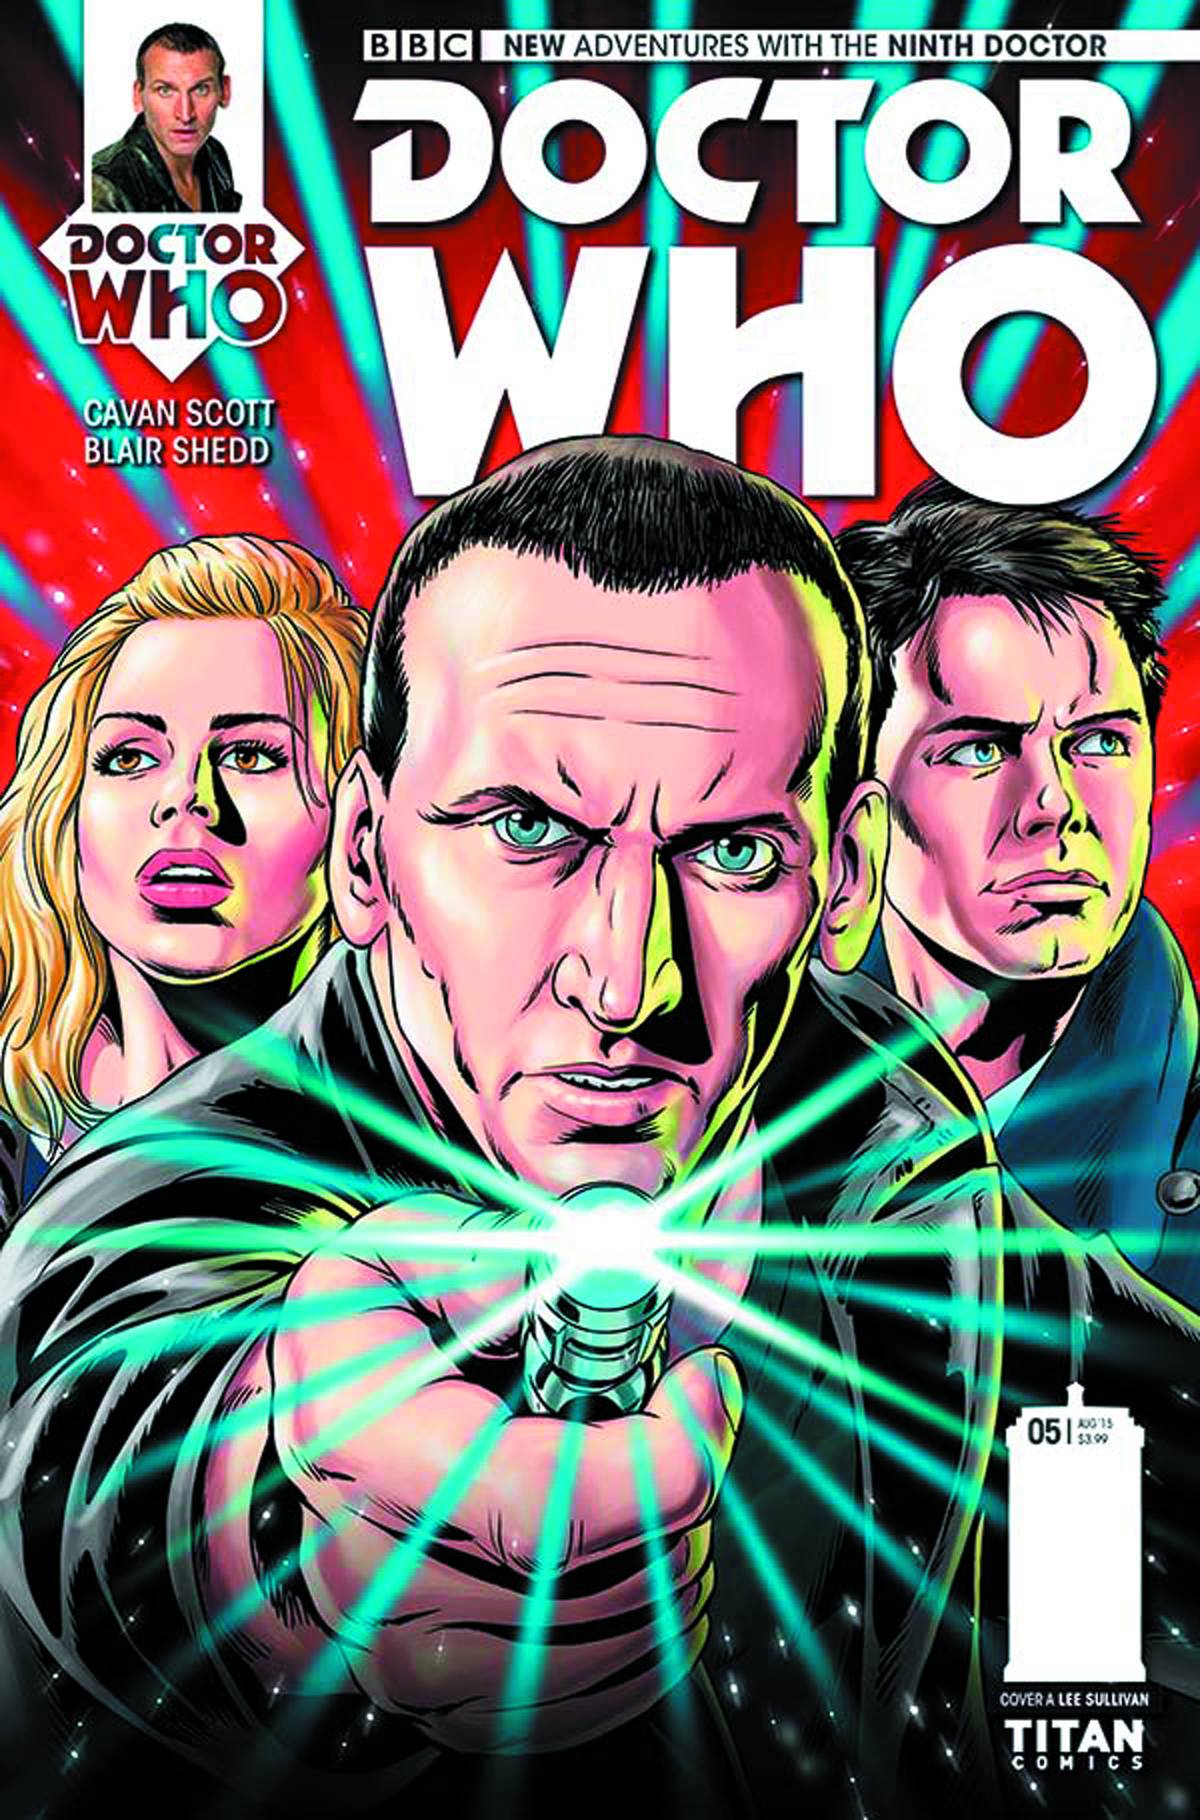 Doctor Who: The Ninth Doctor #5 - Regular Cover